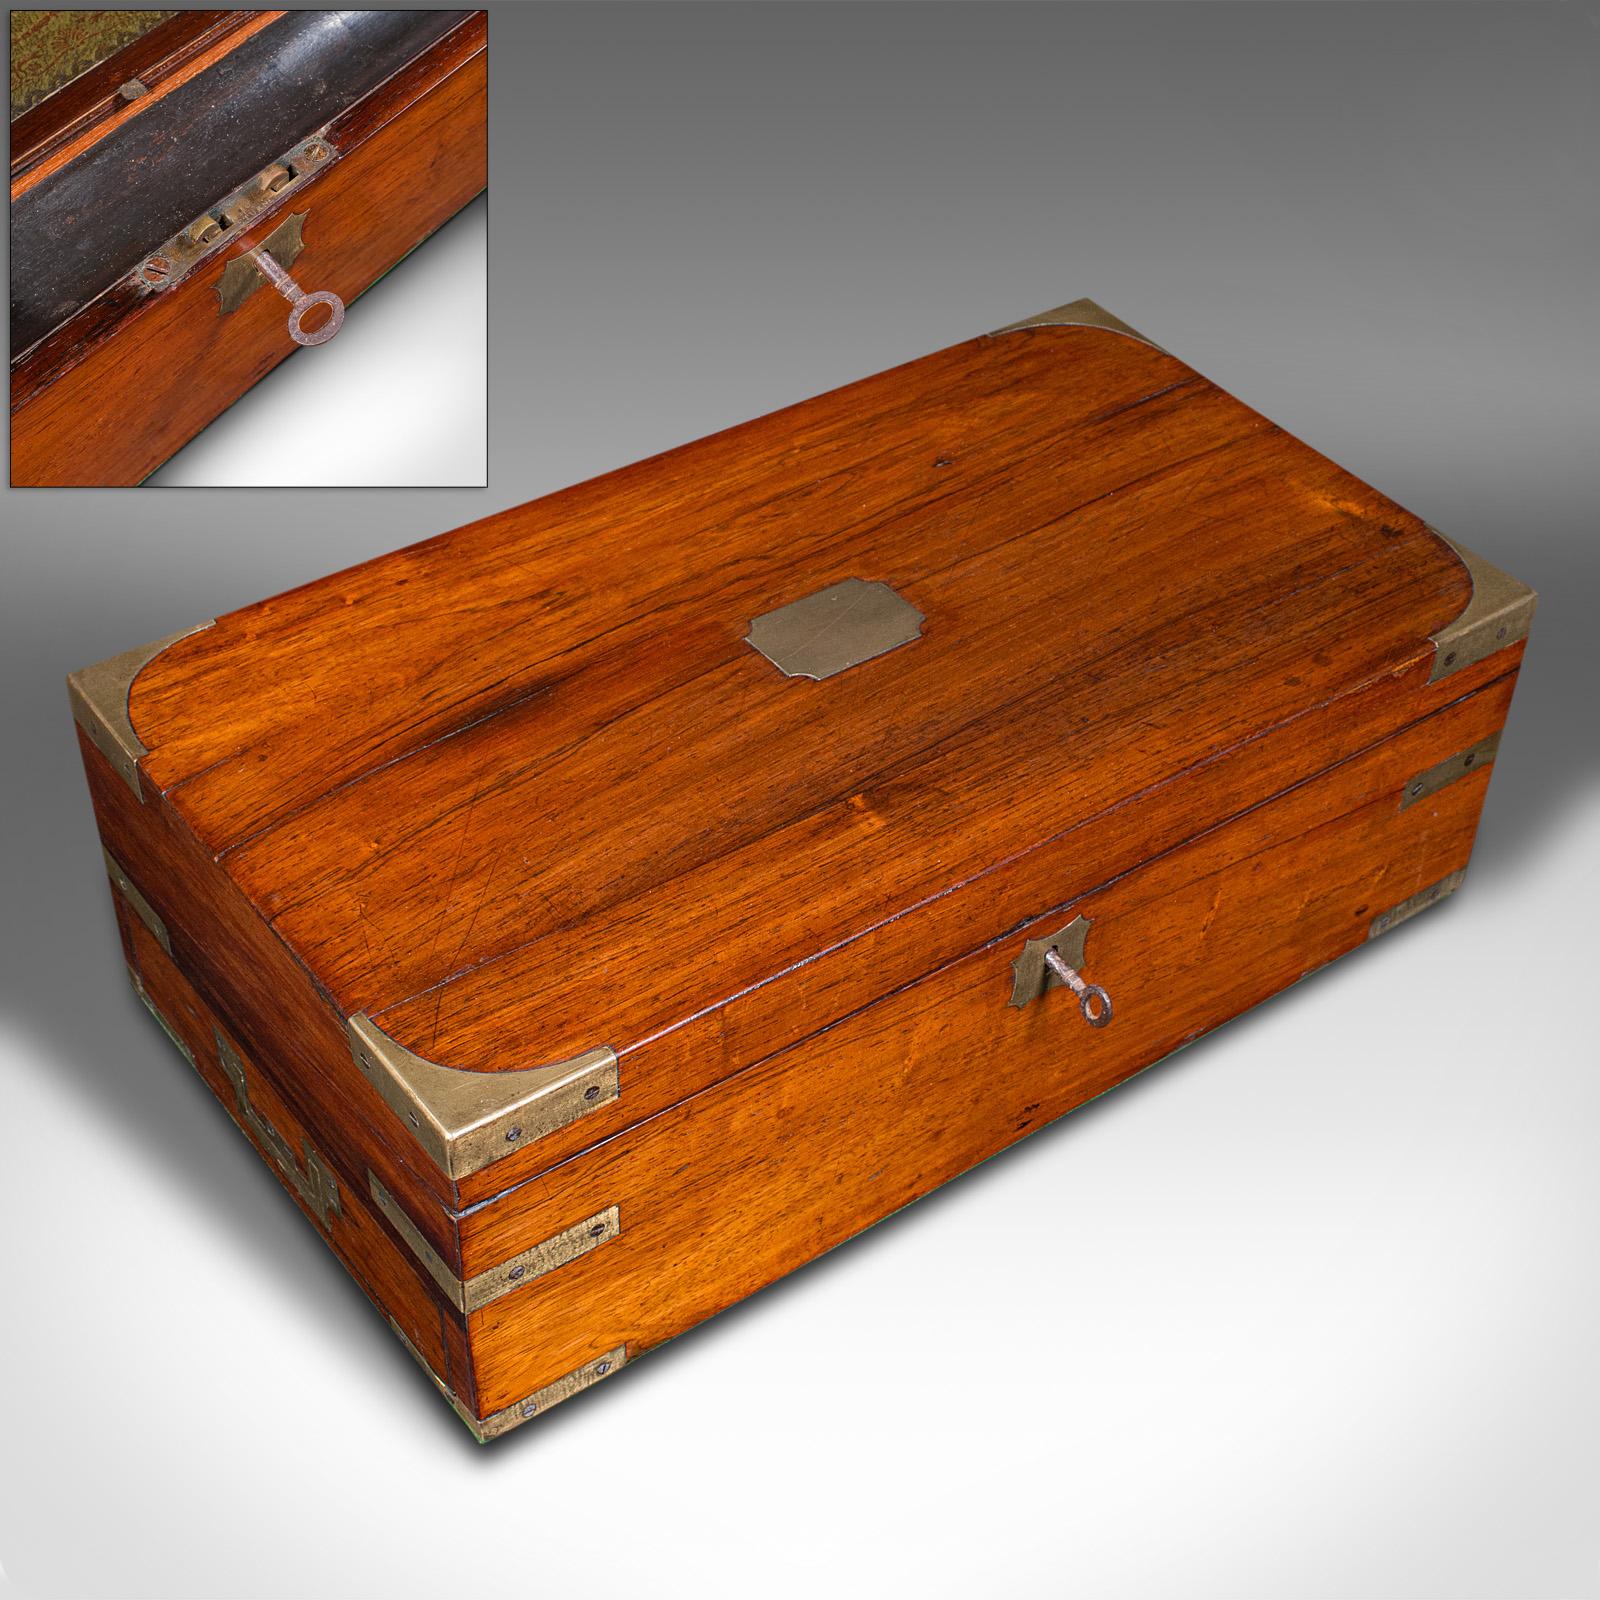 Antique Campaign Writing Slope, English, Walnut, Correspondence Box, Victorian In Fair Condition For Sale In Hele, Devon, GB